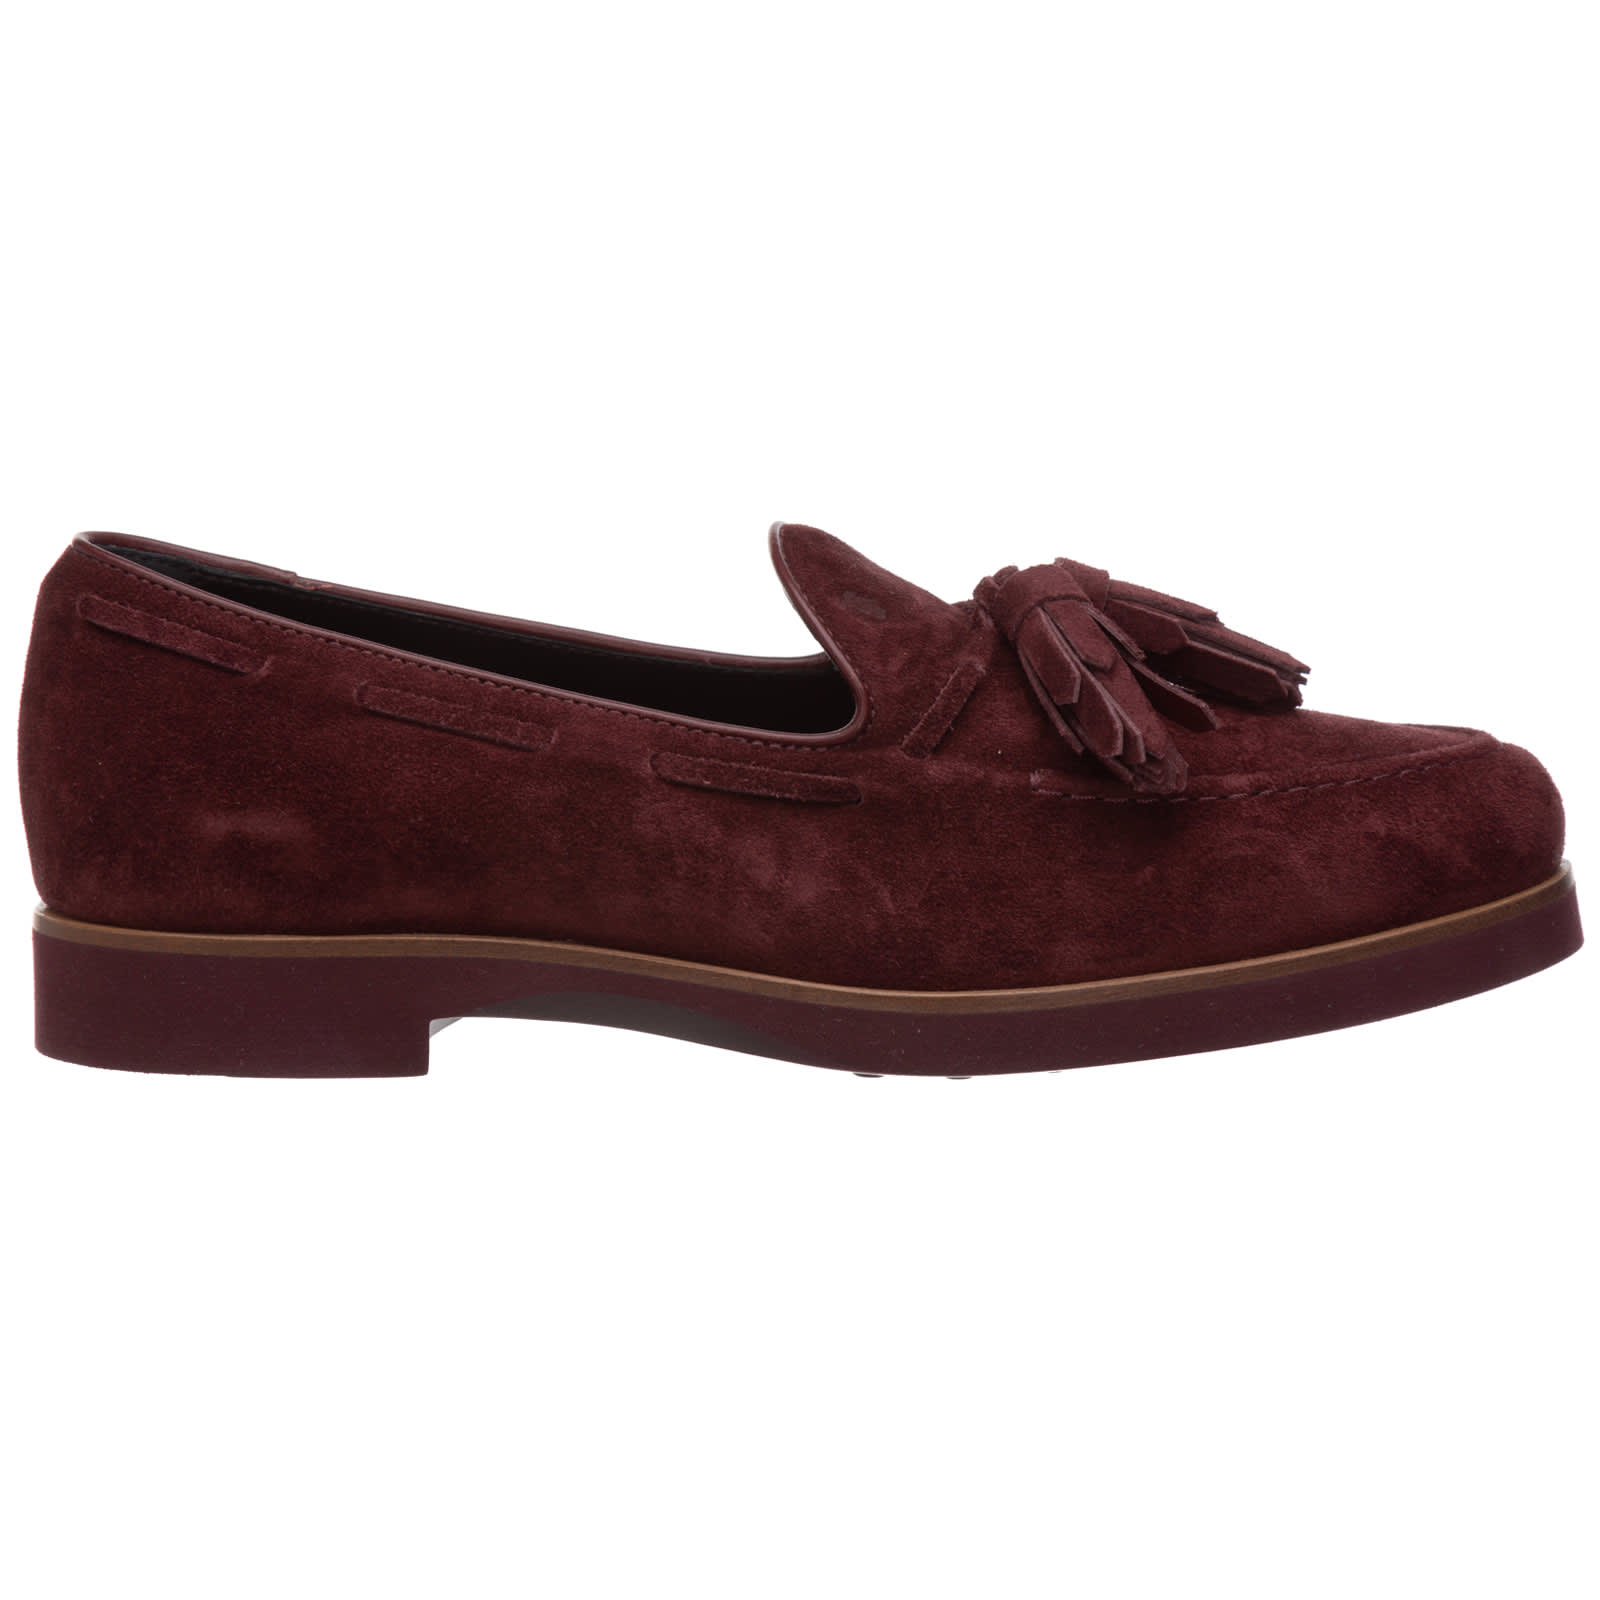 Buy Tods Double T Moccasins online, shop Tods shoes with free shipping